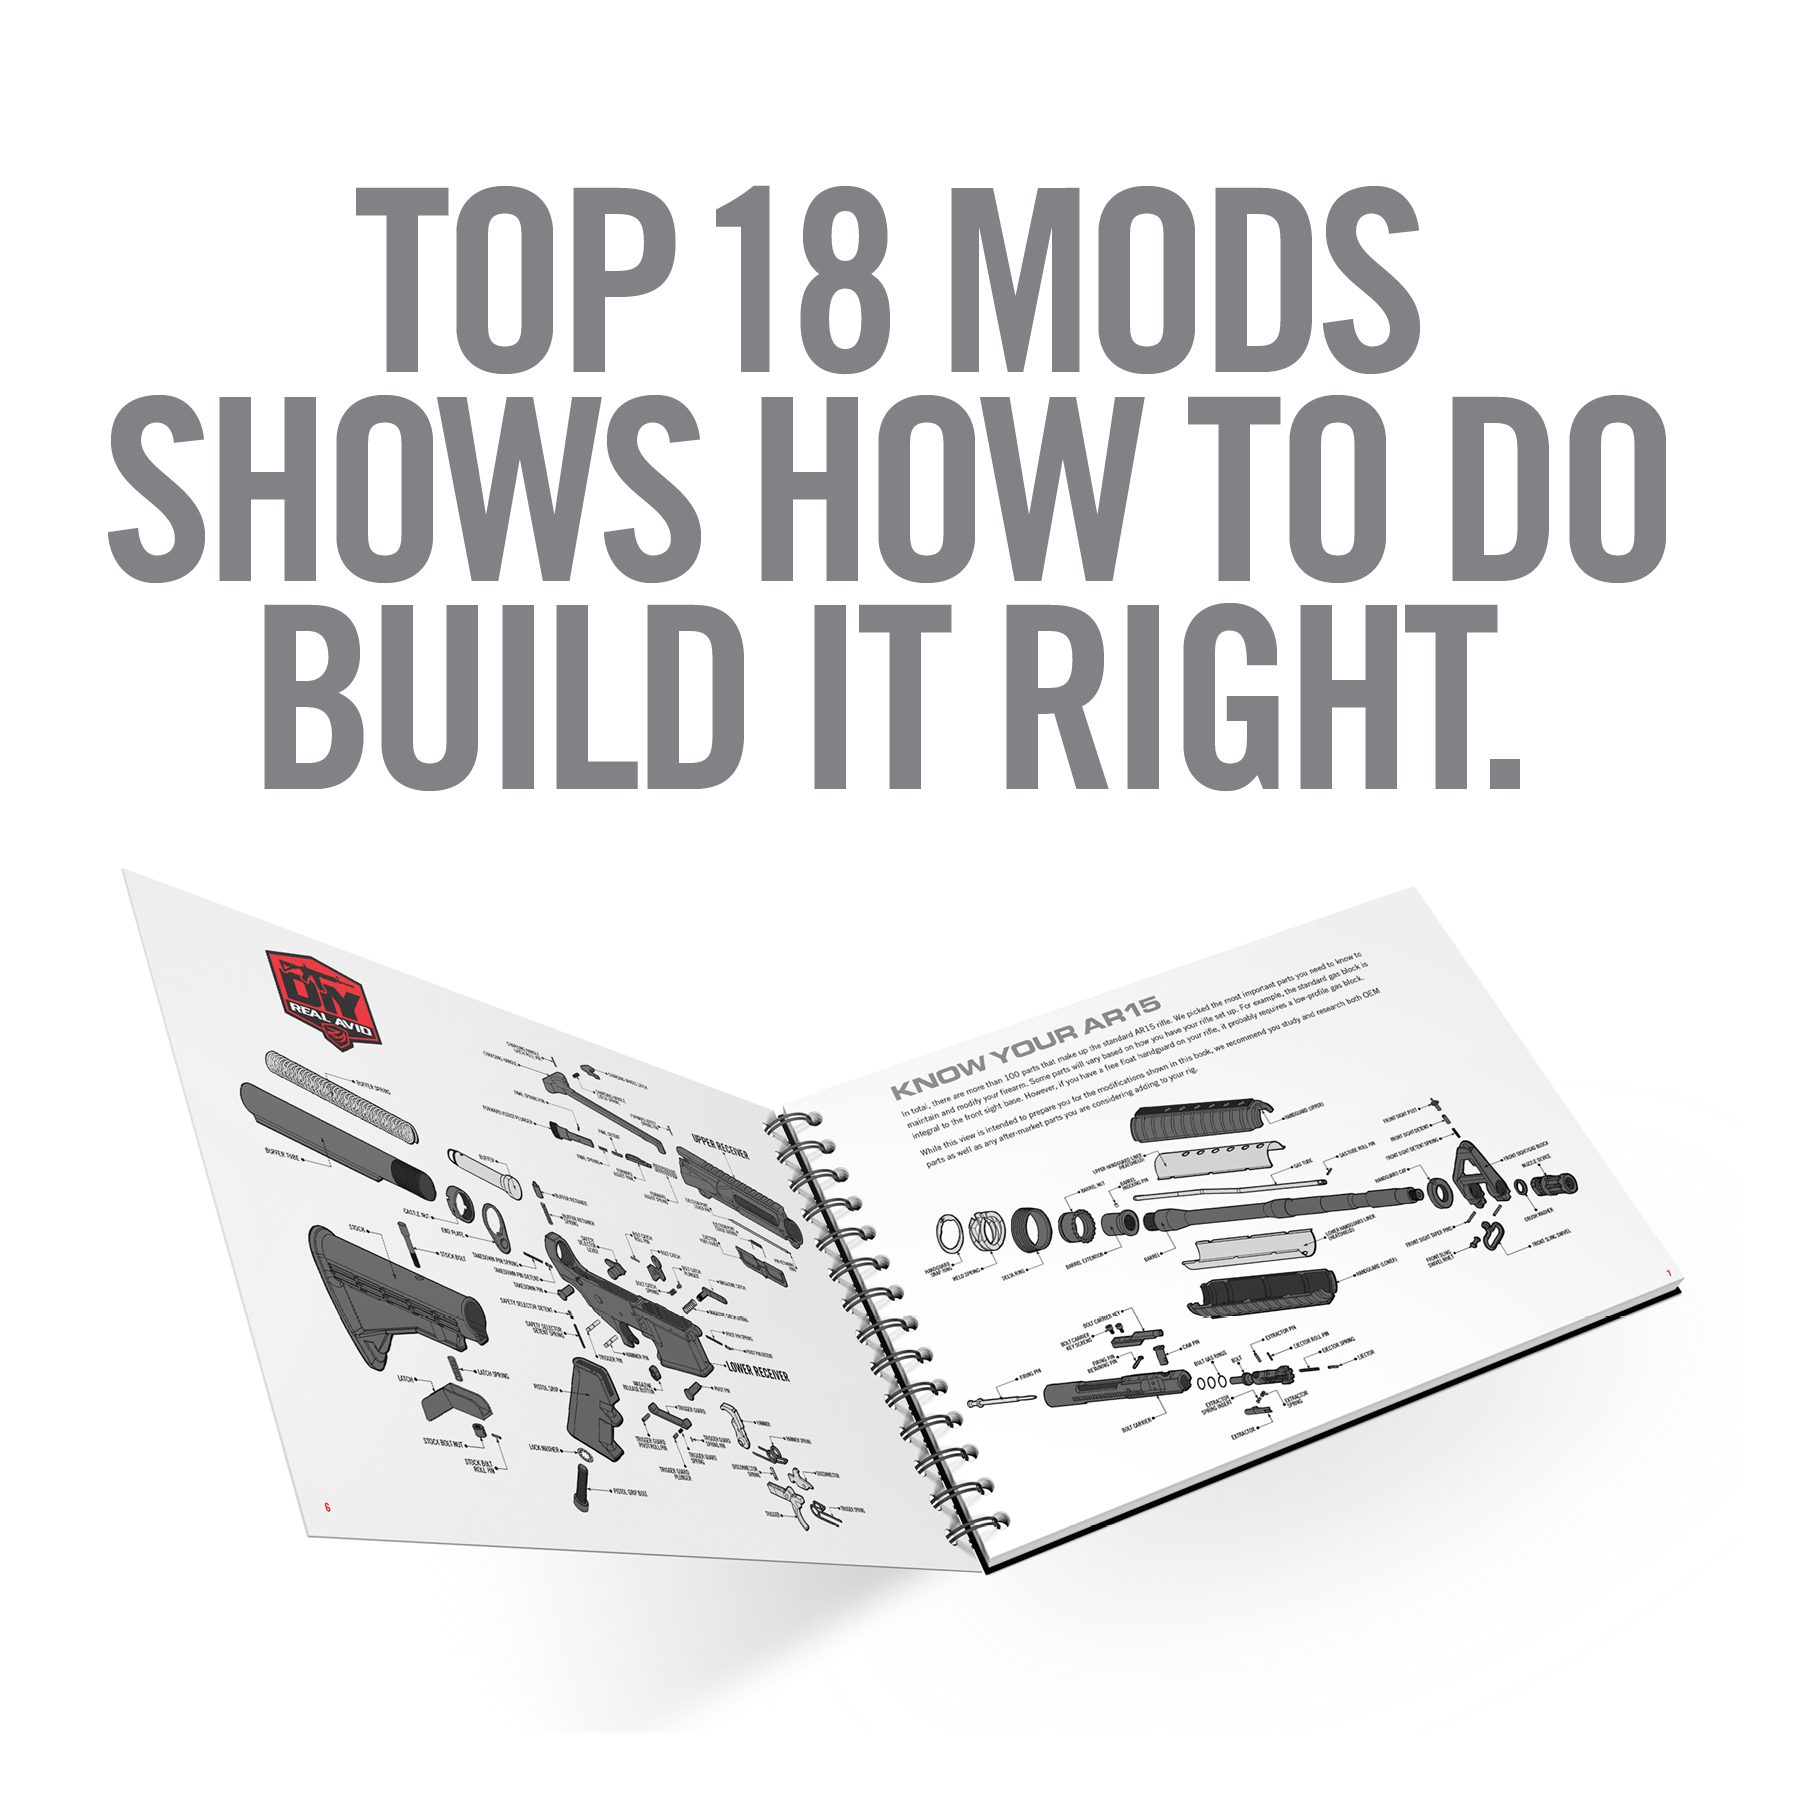 a book with the title top 18 mods shows how to do build it right